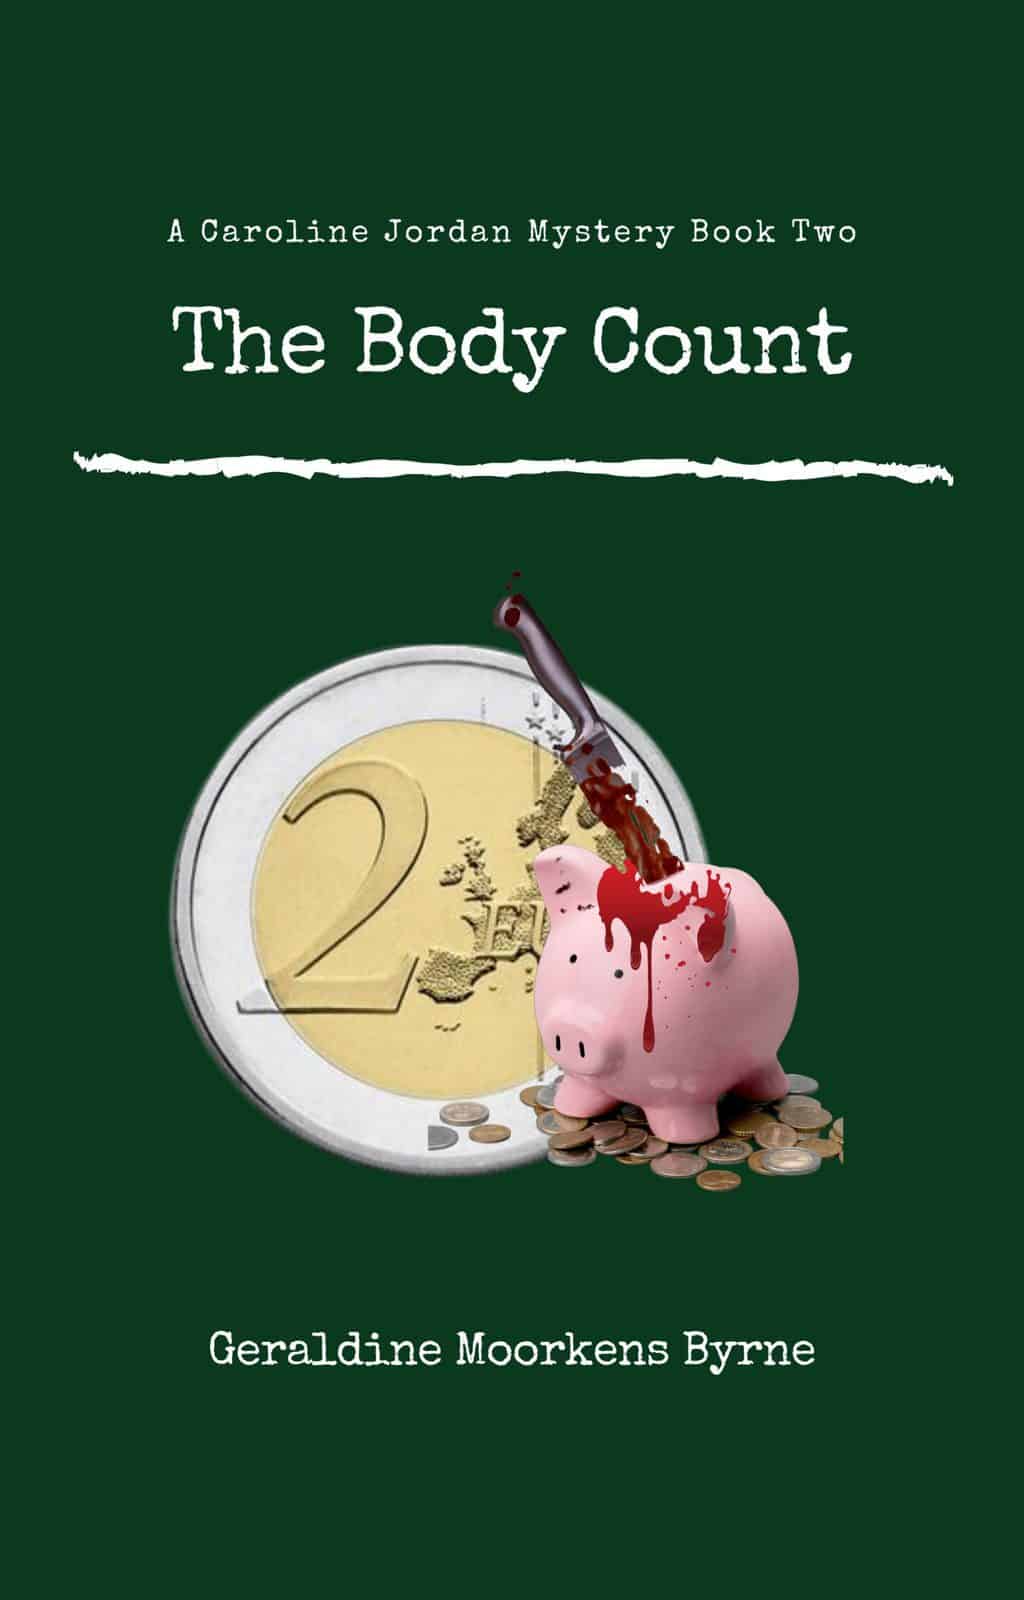 The Body Count FINAL COVER scaled